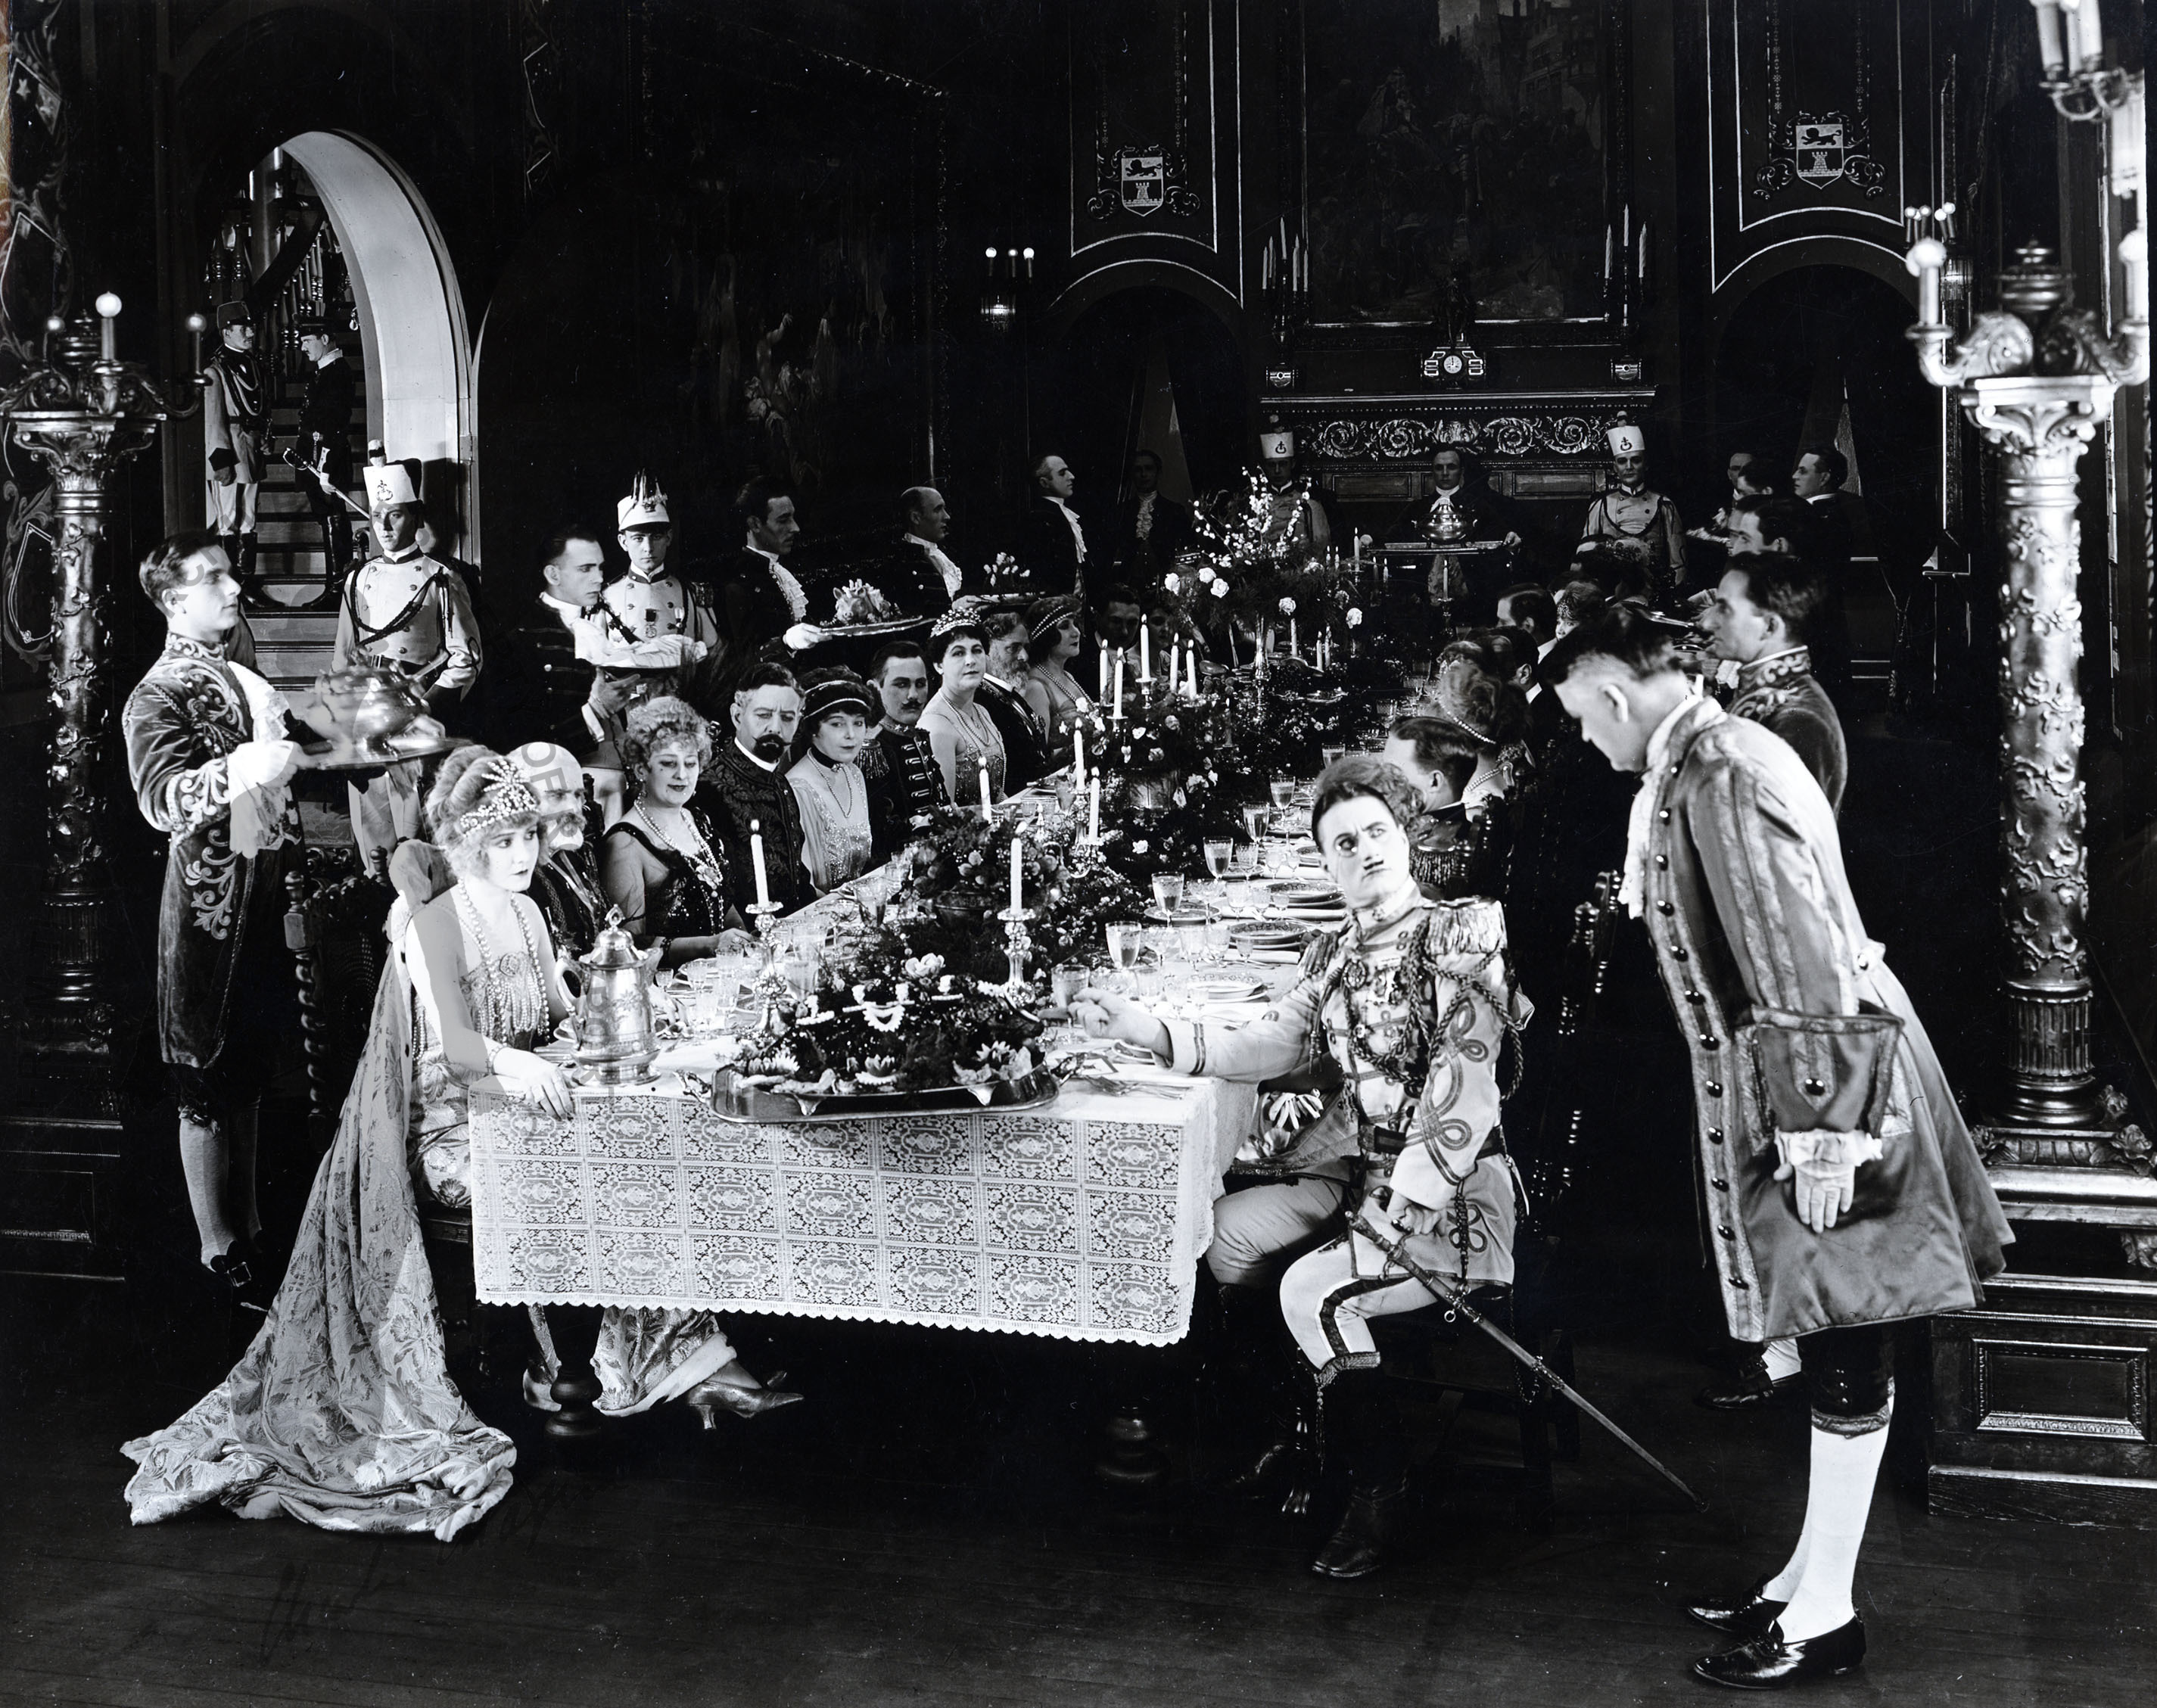 Search Search King Queen Joker The King And The Queen In The Ball Hall During A Banquet Charlie Chaplin Archive